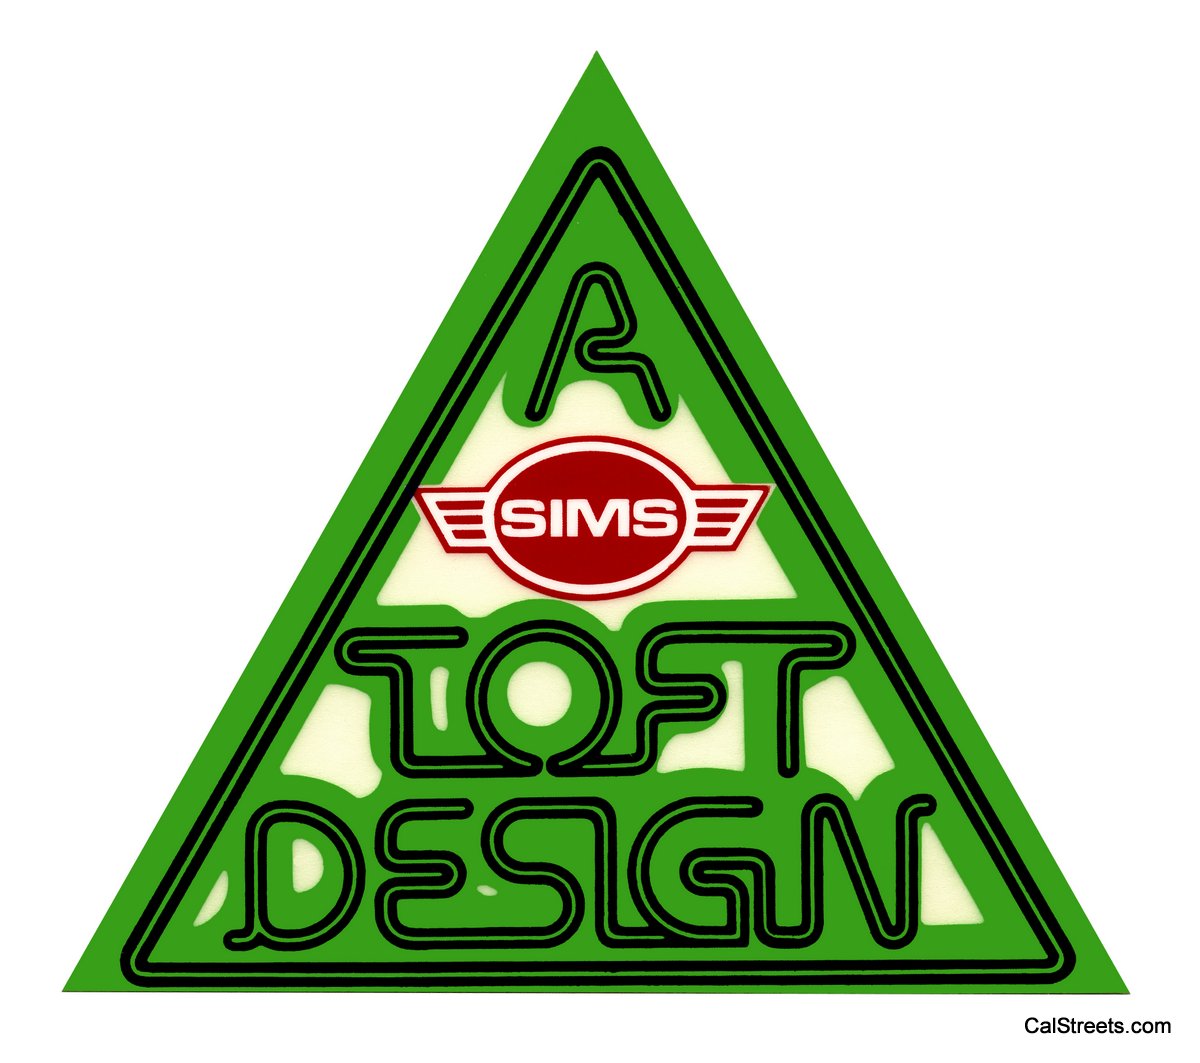 Sims-A-Toft-Design-Real1.jpg